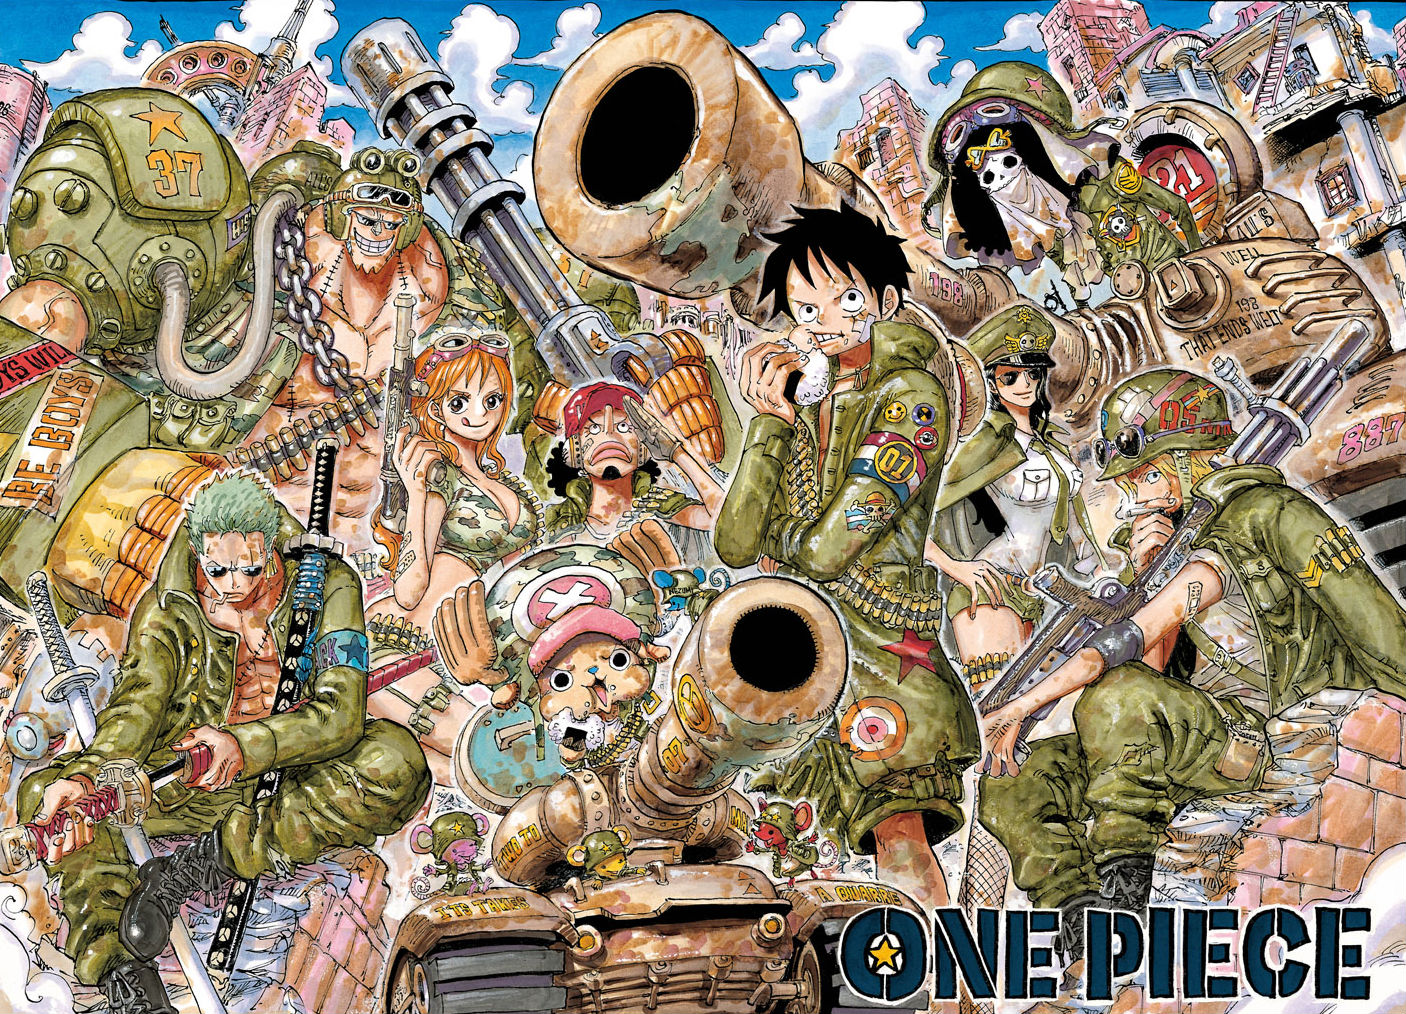 One Piece Manga Artist Says The Series Will Span Just Over 100 Volumes Lrm